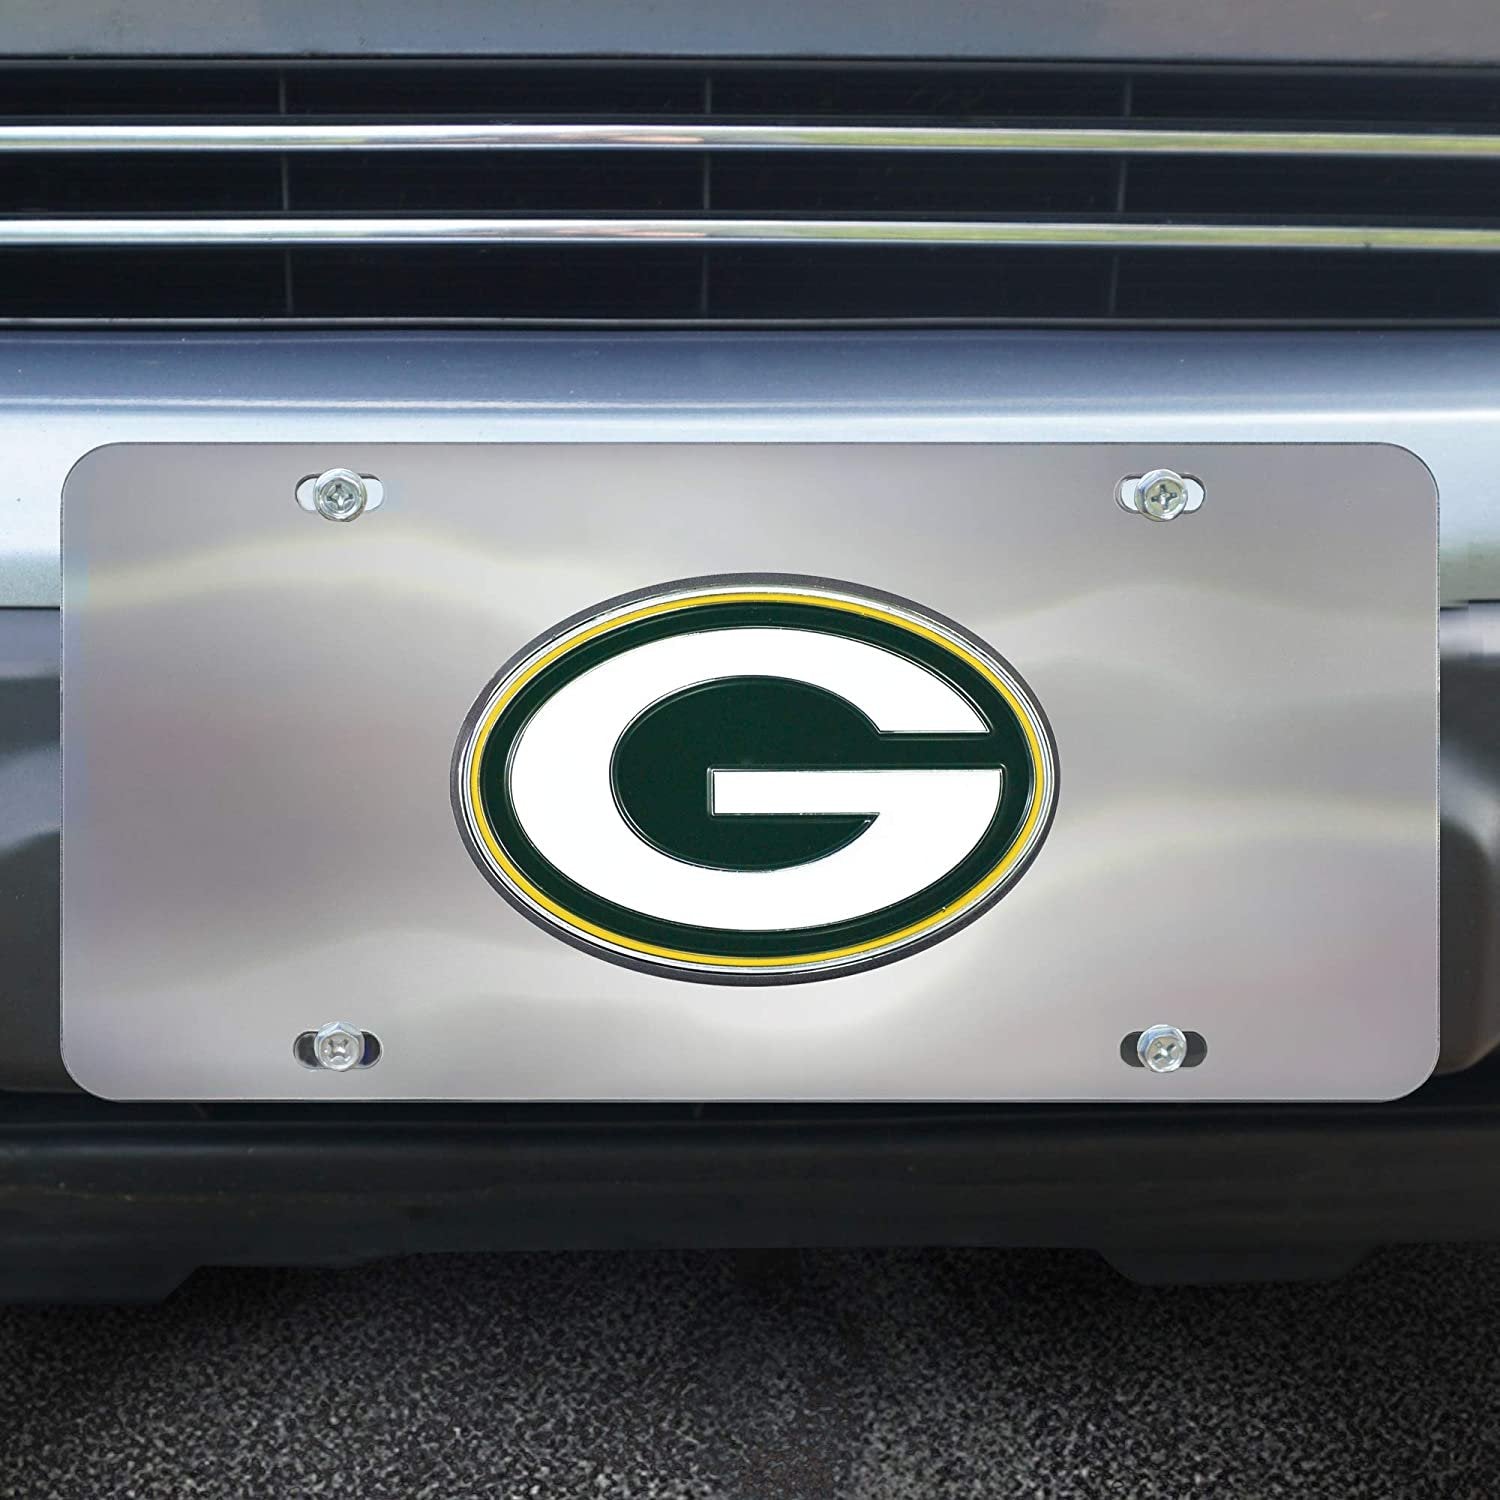 Green Bay Packers License Plate Tag, Premium Stainless Steel Diecast, Chrome, Raised Solid Metal Color Emblem, 6x12 Inch